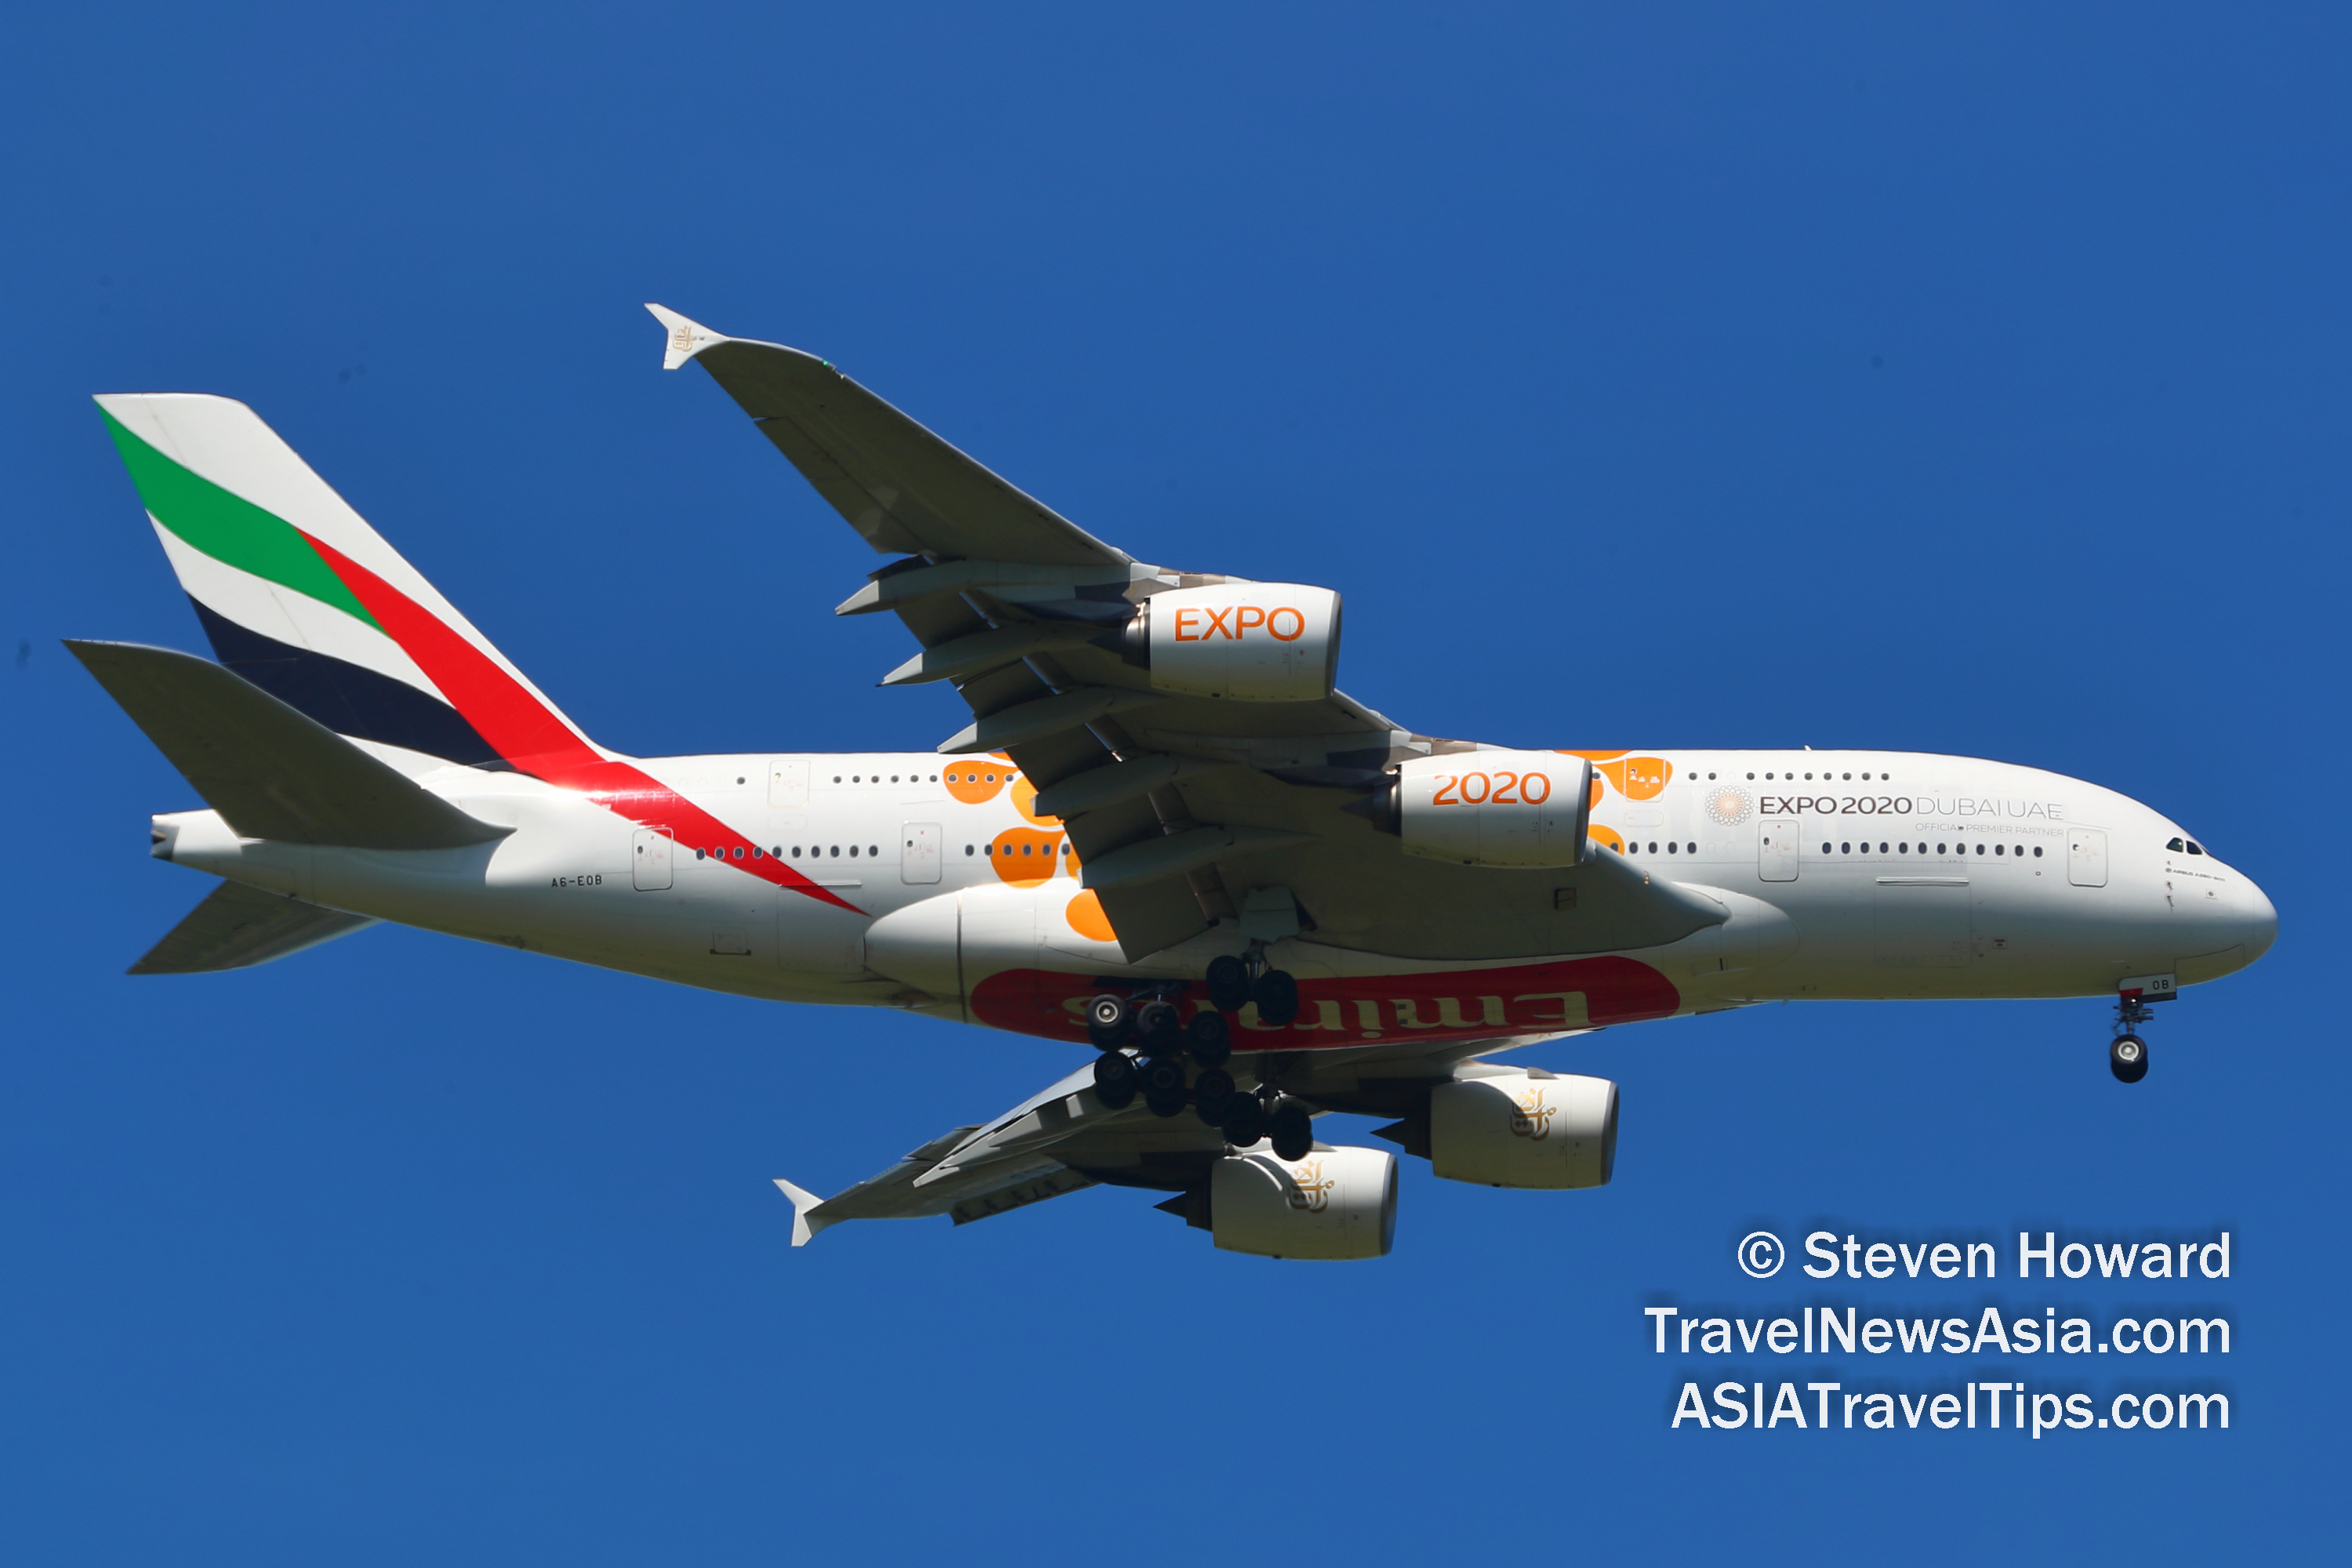 Emirates Airbus A380 reg: A6-EOB. Picture by Steven Howard of TravelNewsAsia.com on 4 July 2019. Click to enlarge.